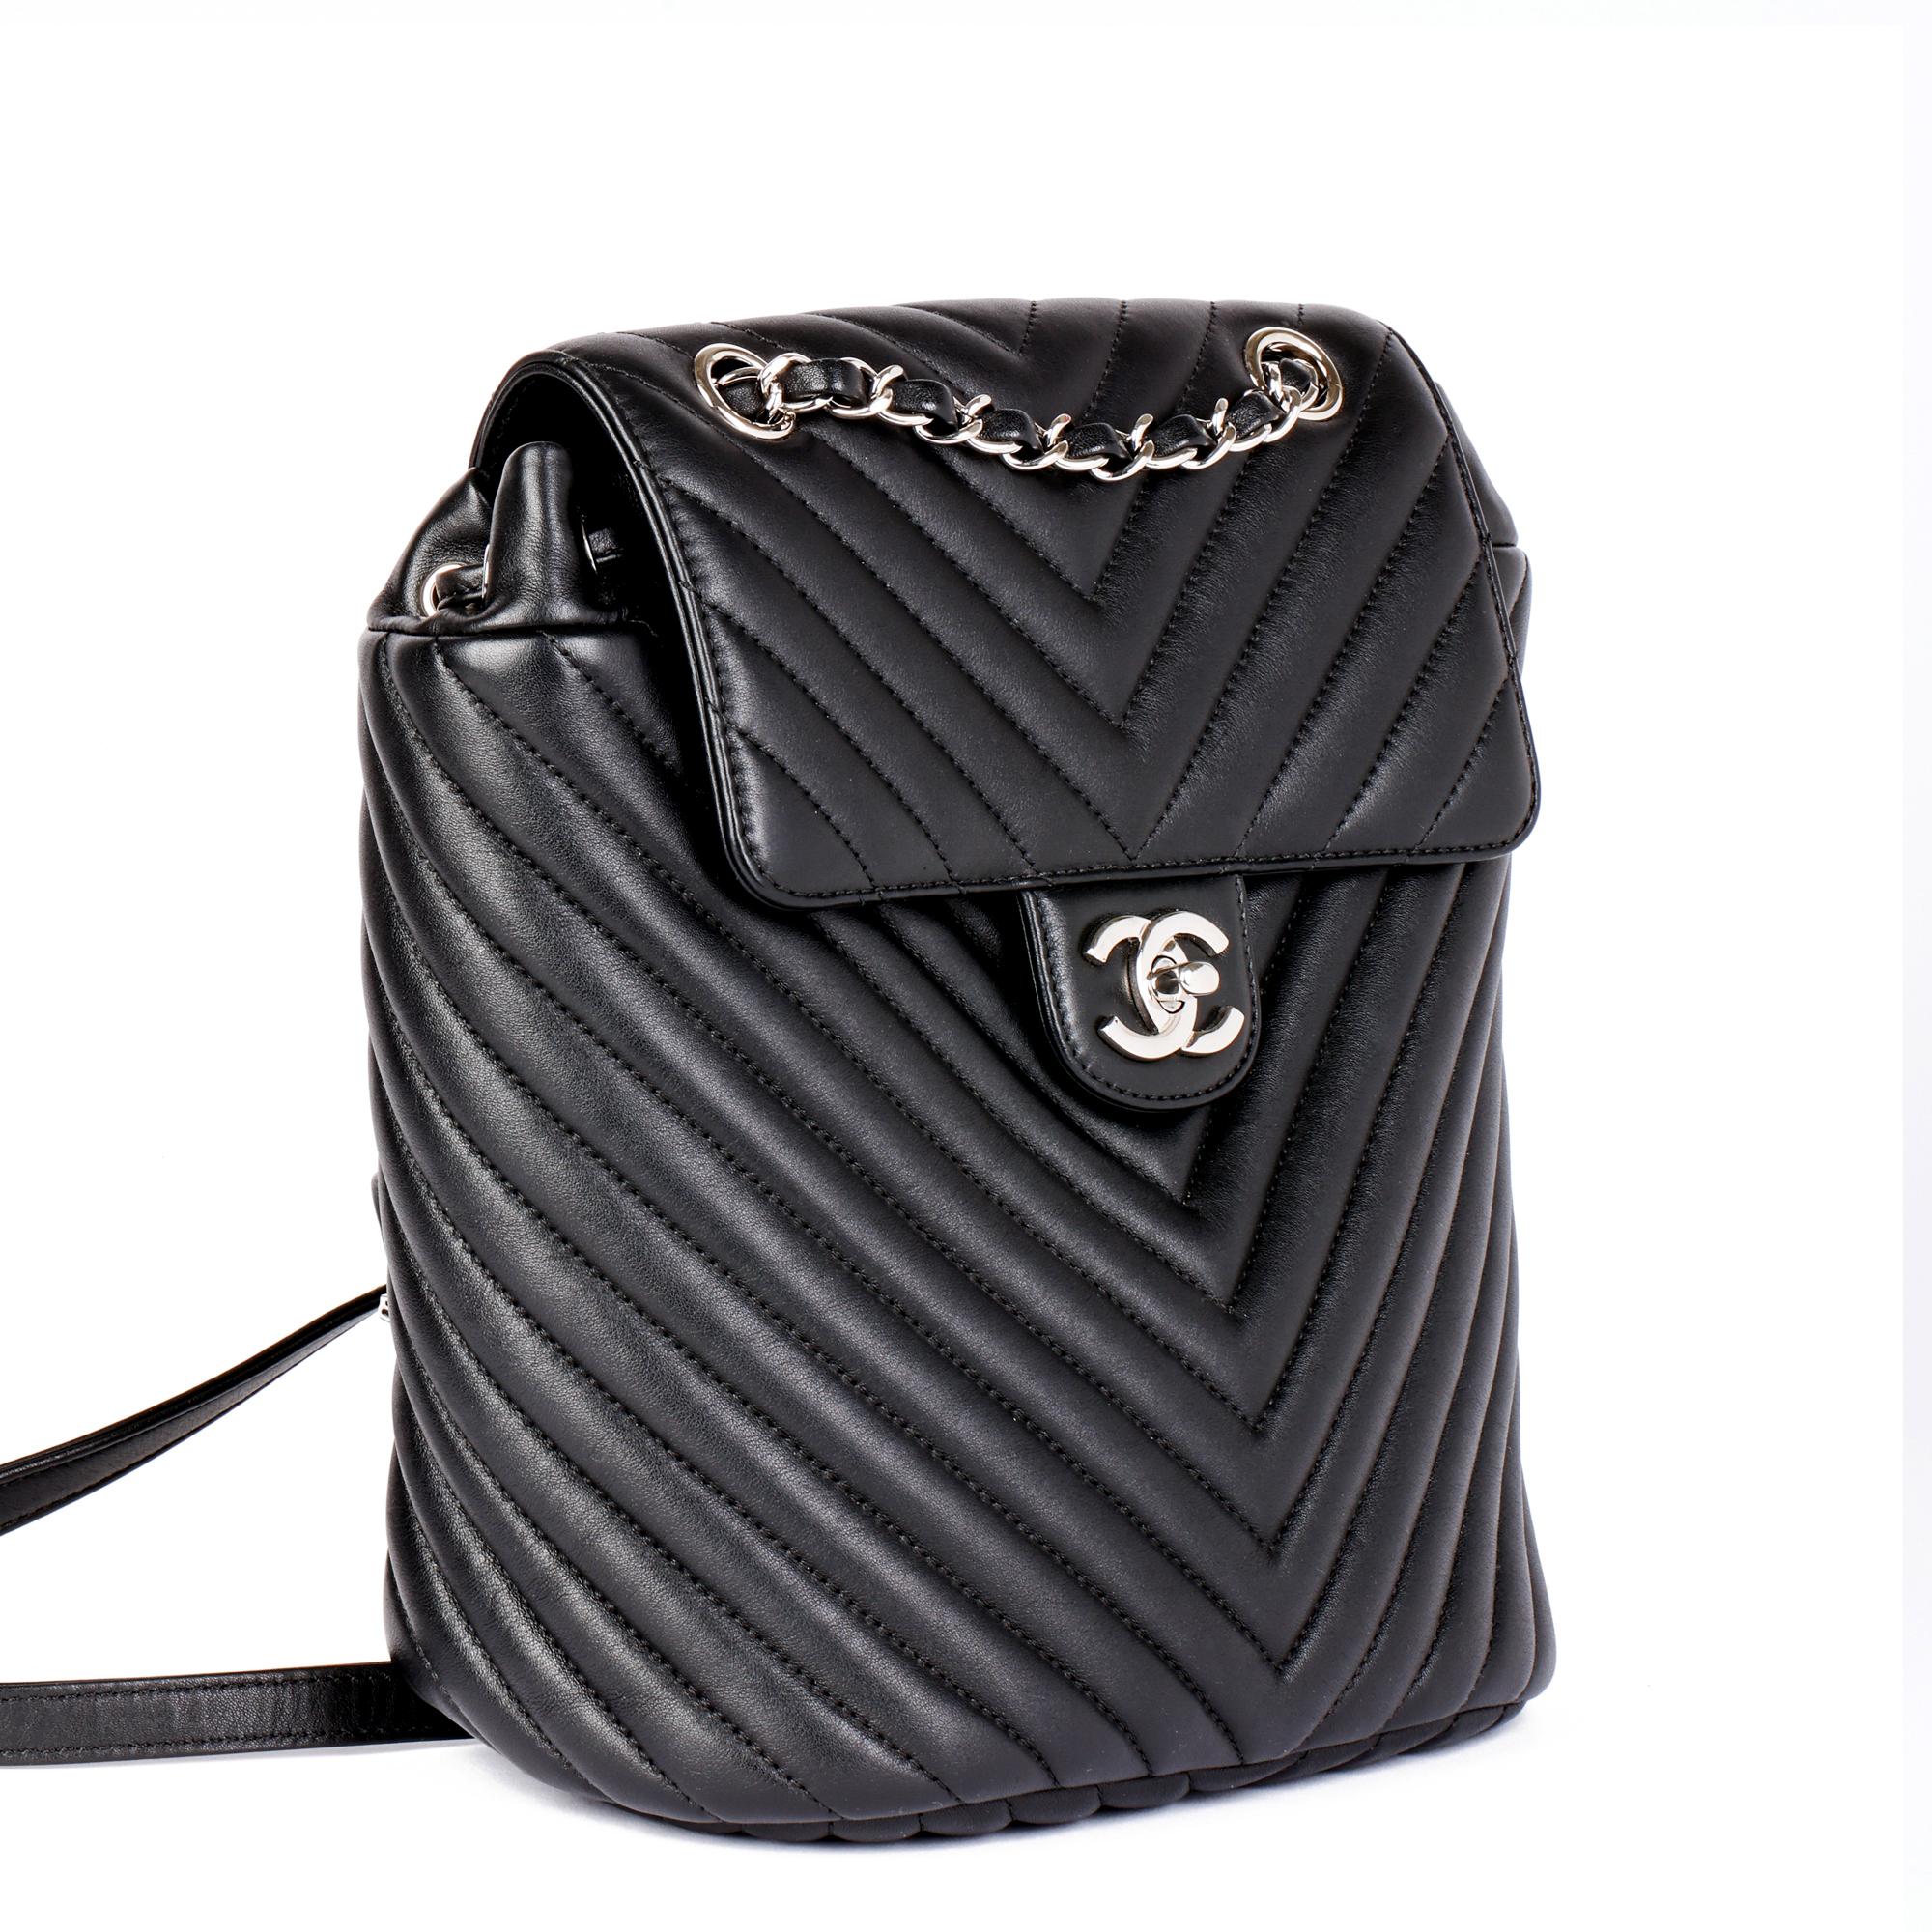 CHANEL
Black Chevron Quilted Lambskin Small Urban Spirit Backpack

Serial Number: 25735339
Age (Circa): 2018
Accompanied By: Chanel Dust Bag, Authenticity Card, Protective Felt
Authenticity Details: Authenticity Card, Serial Sticker (Made in